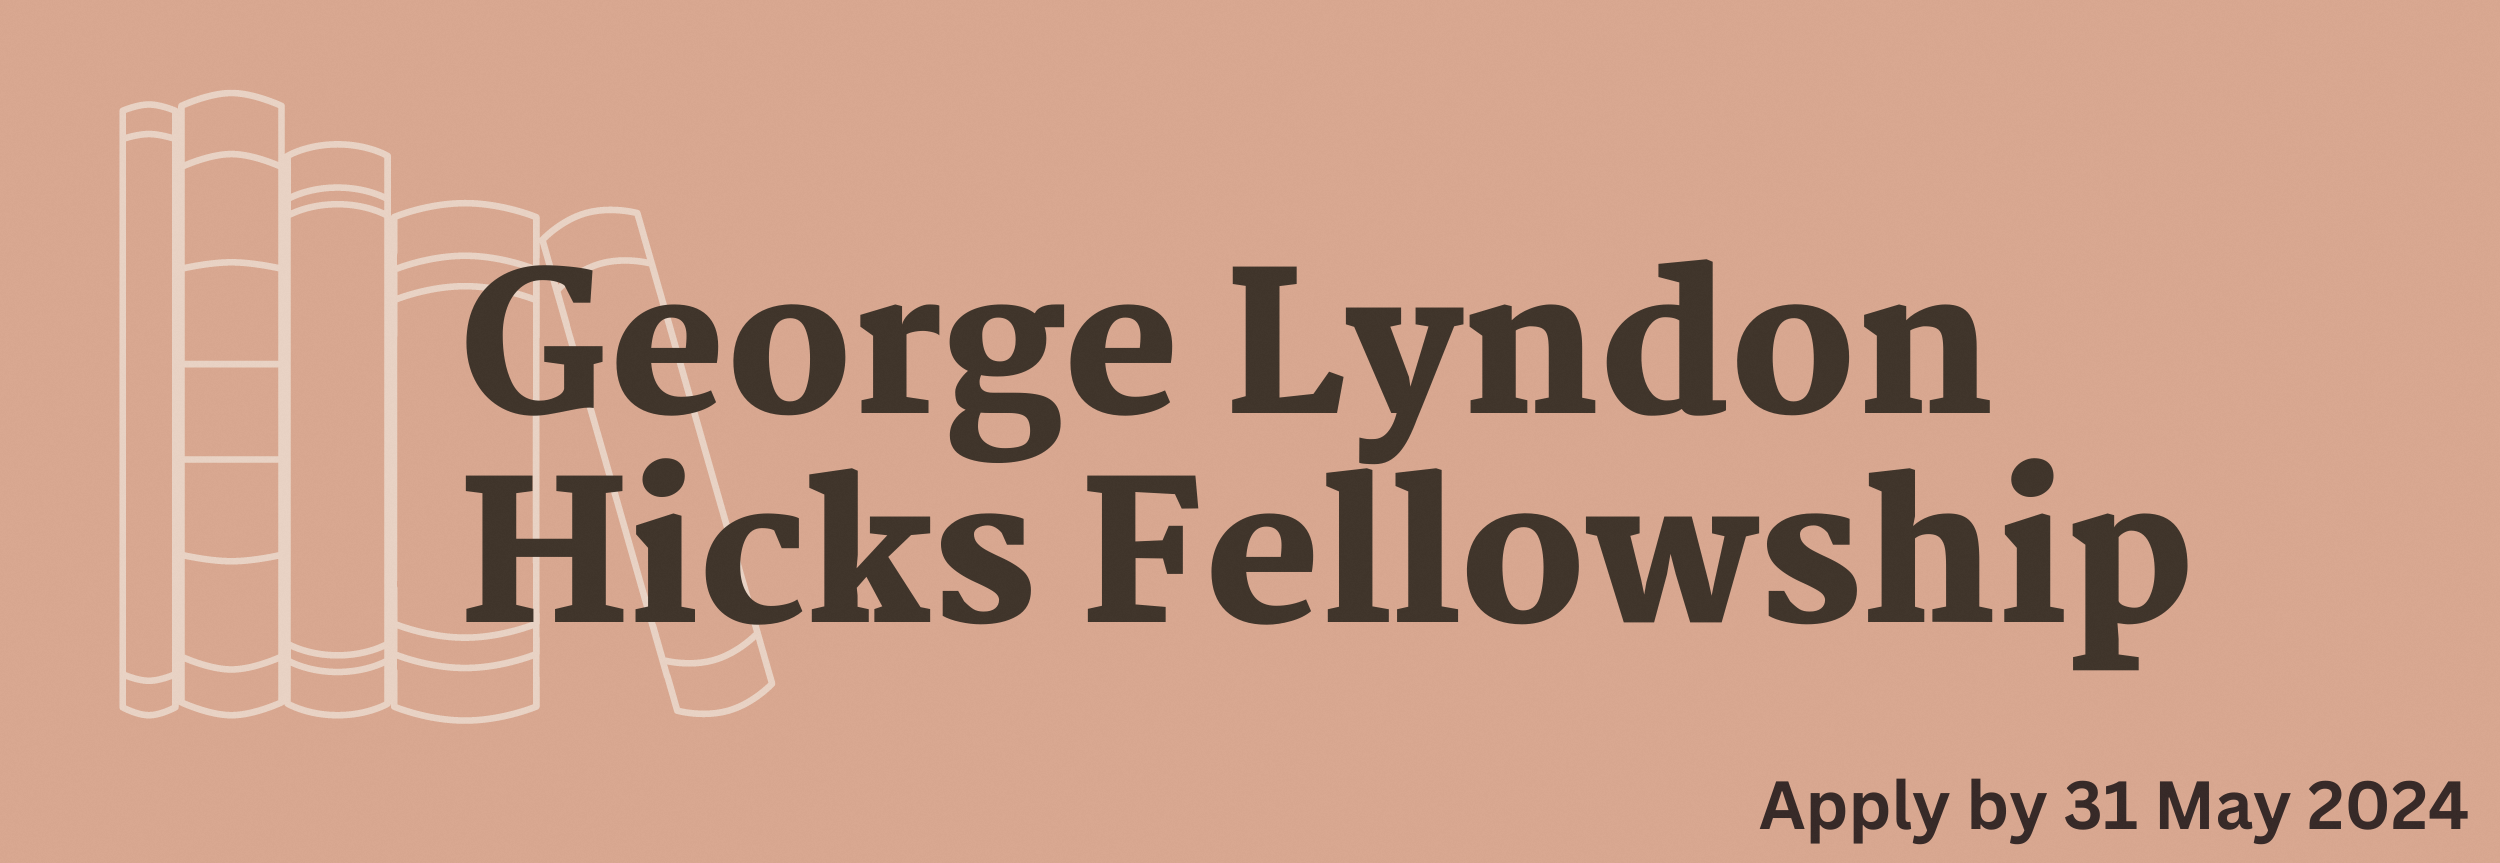 Apply for the George Lyndon Hicks Fellowship by 31 May 2024.